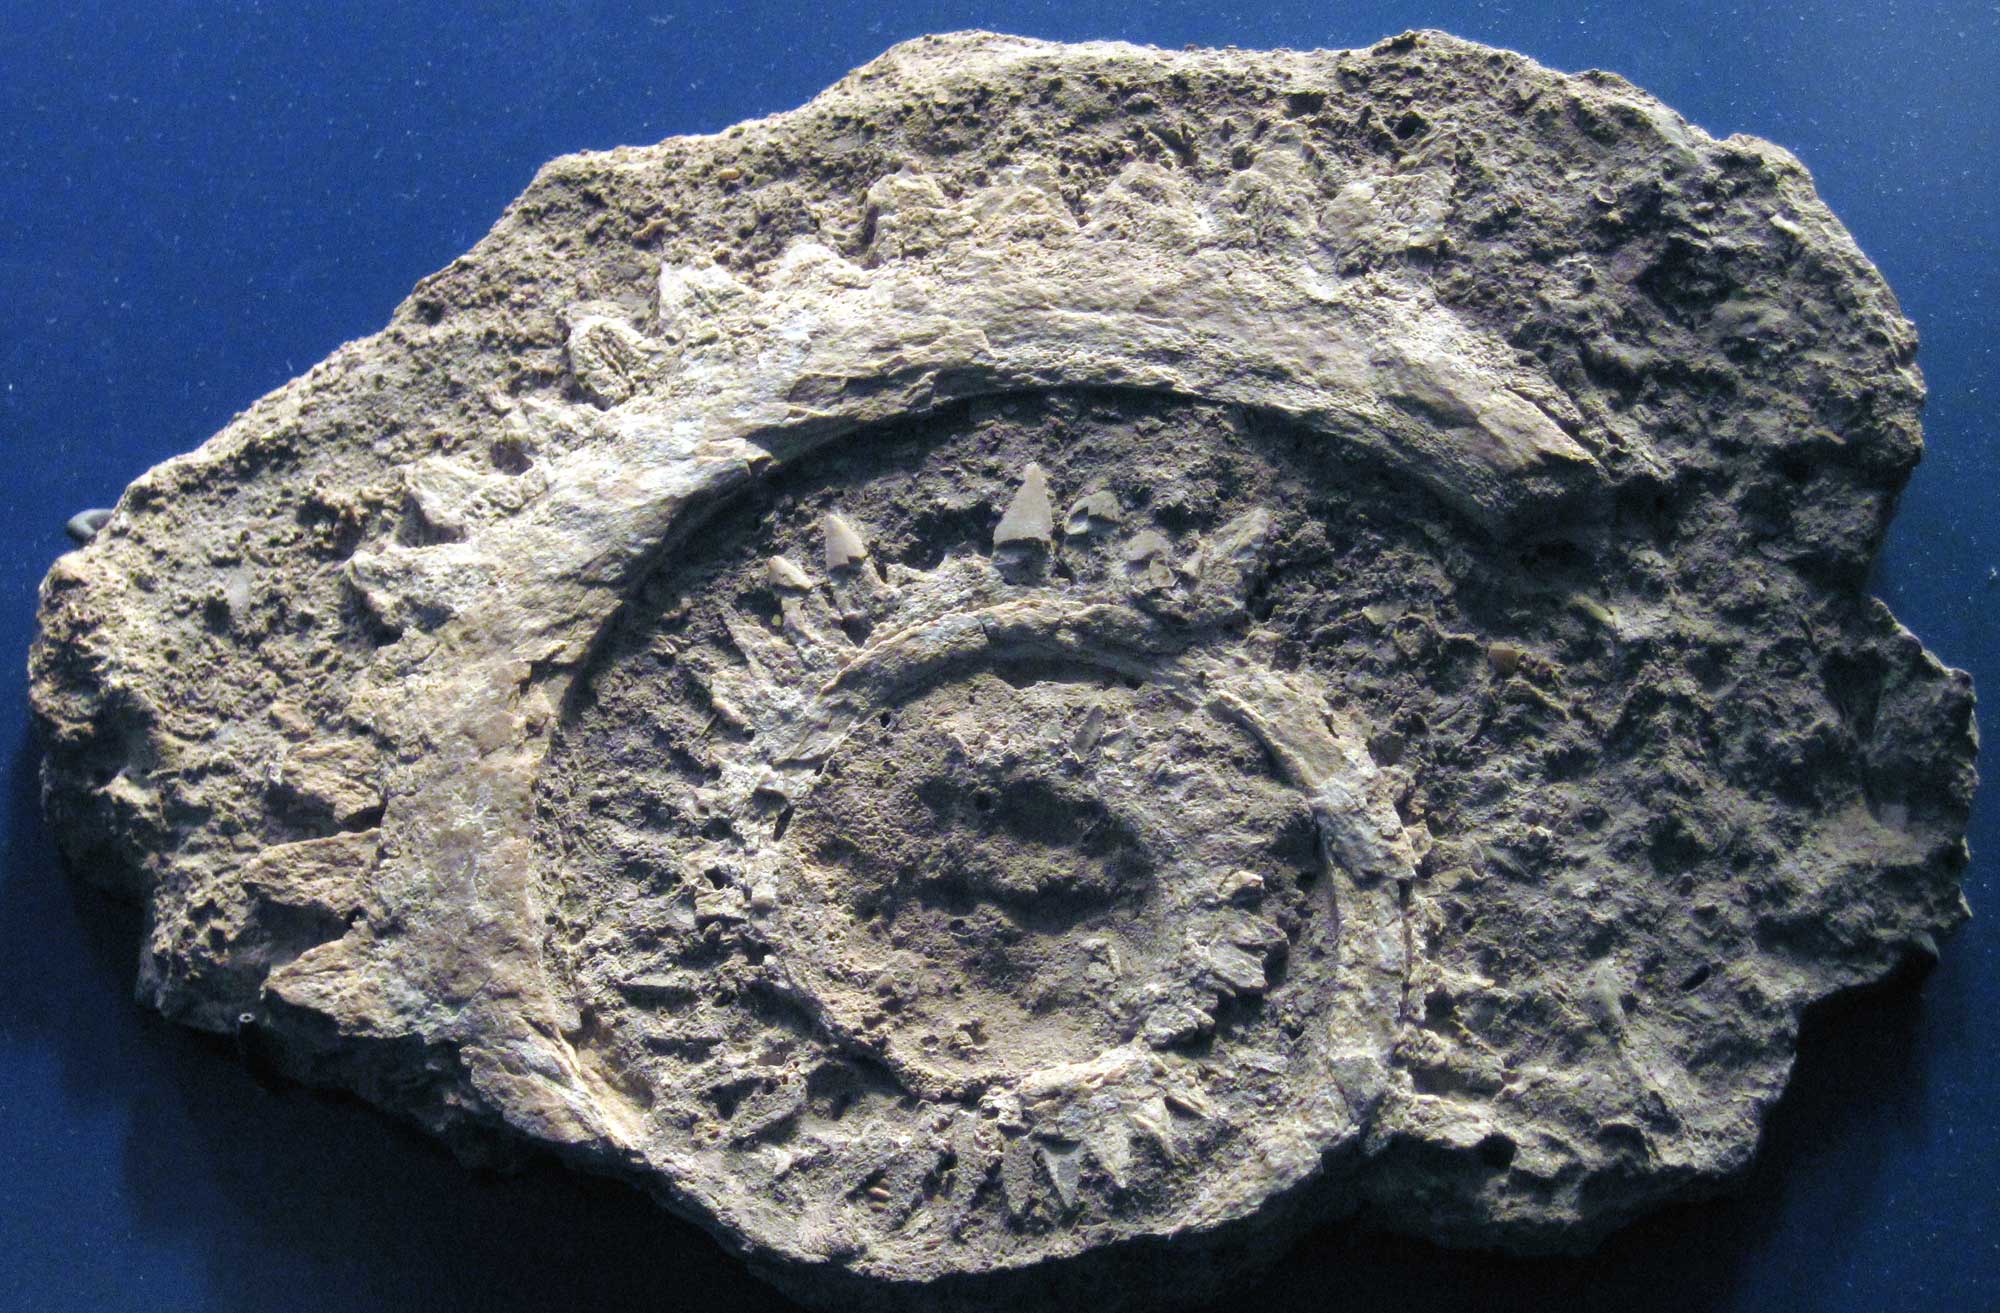 Photo of a helical tooth whorl of Helicoprion, an ancient shark. The teeth are arranged on a spiraling jaw structure.